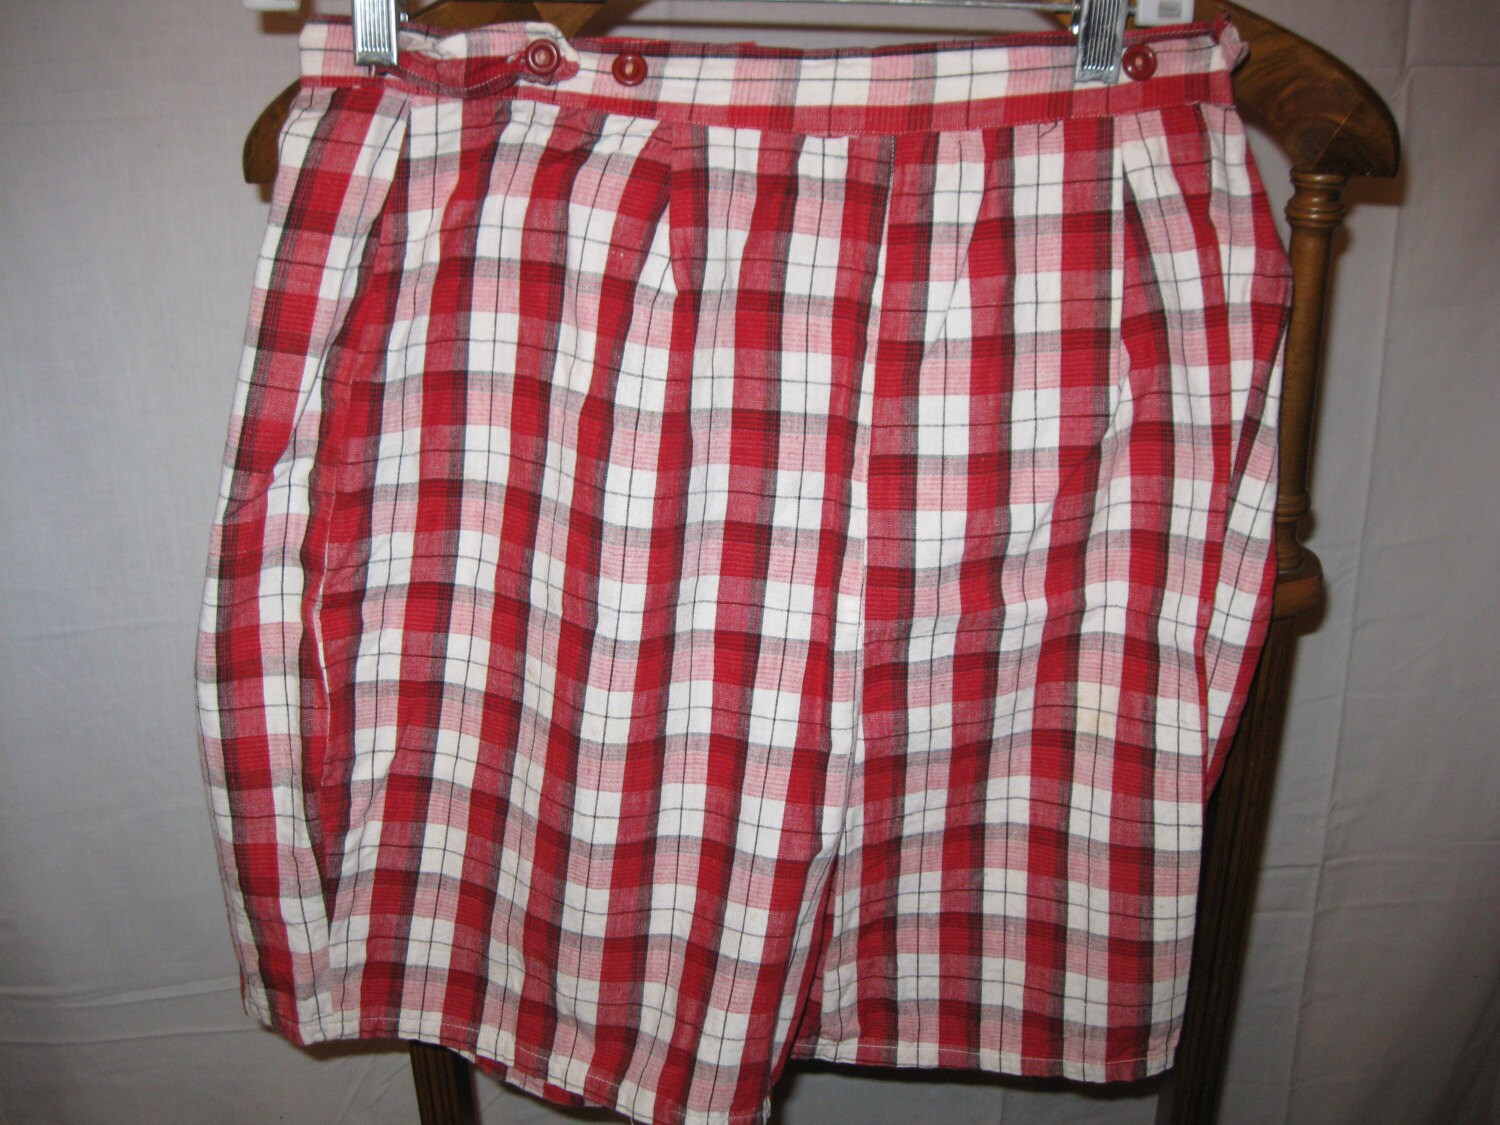 Vintage shorts womans by PotziesPonderings on Etsy